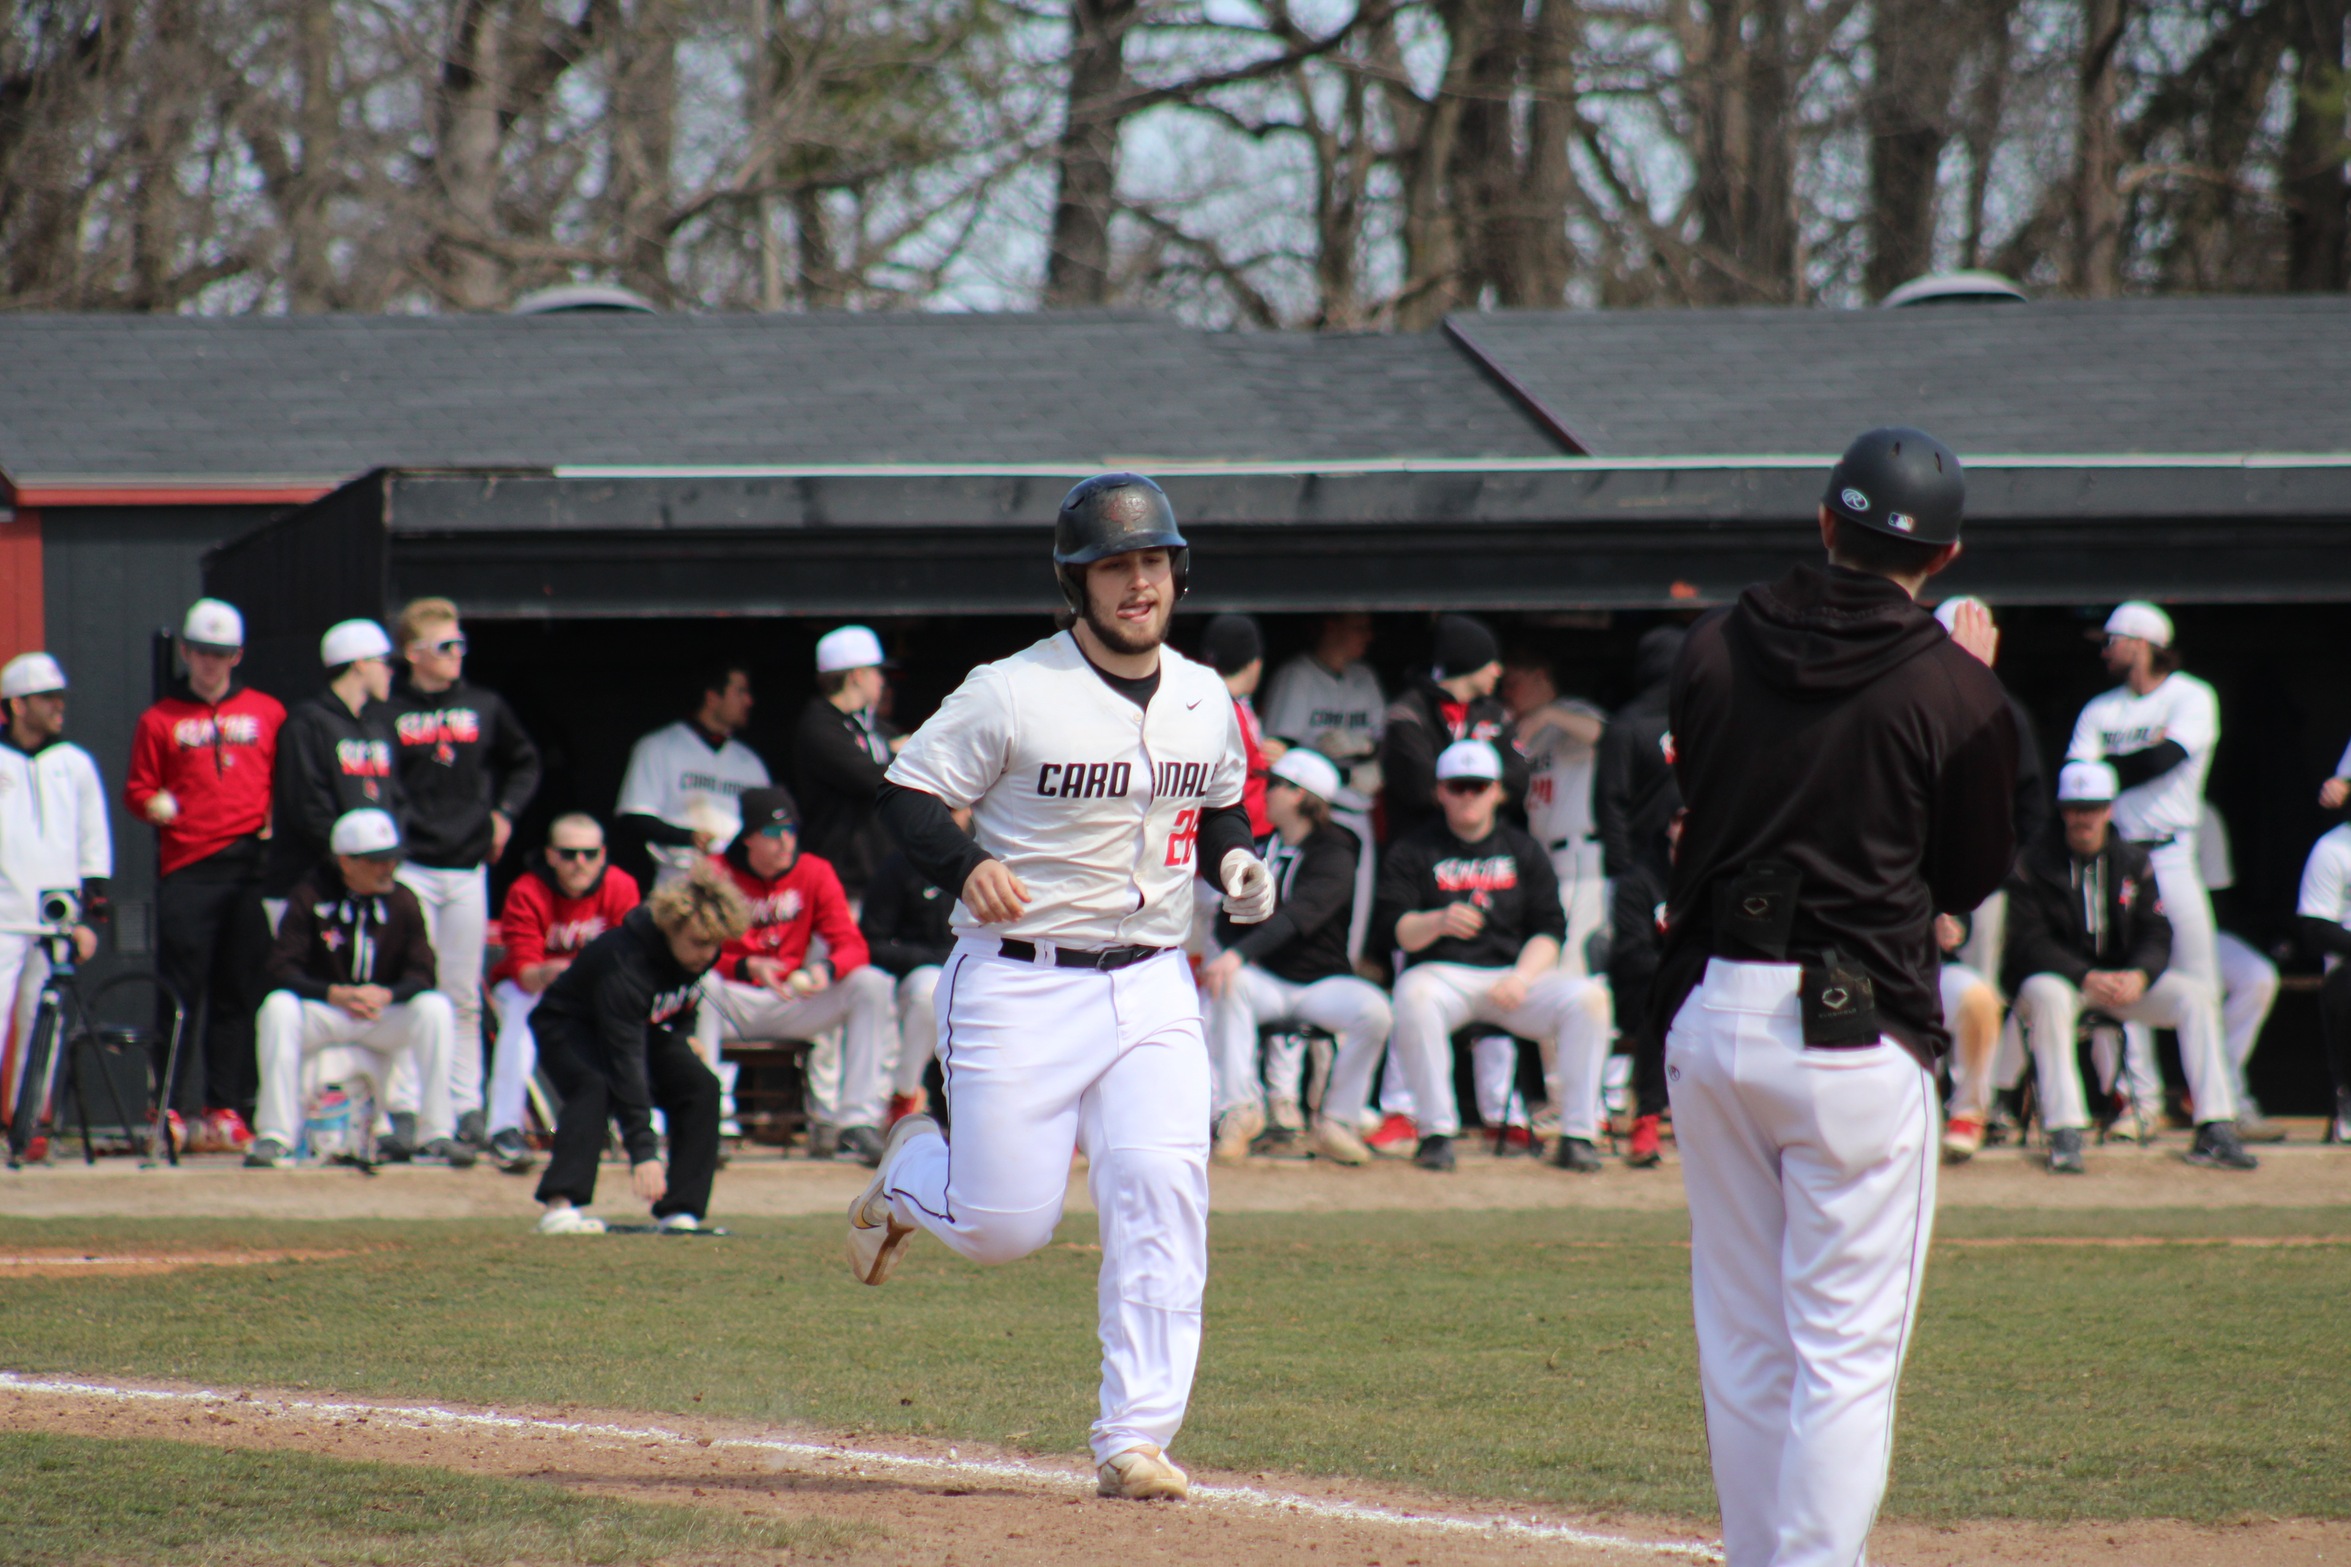 Baseball splits series with Cornerstone; walk off second game in 11th inning